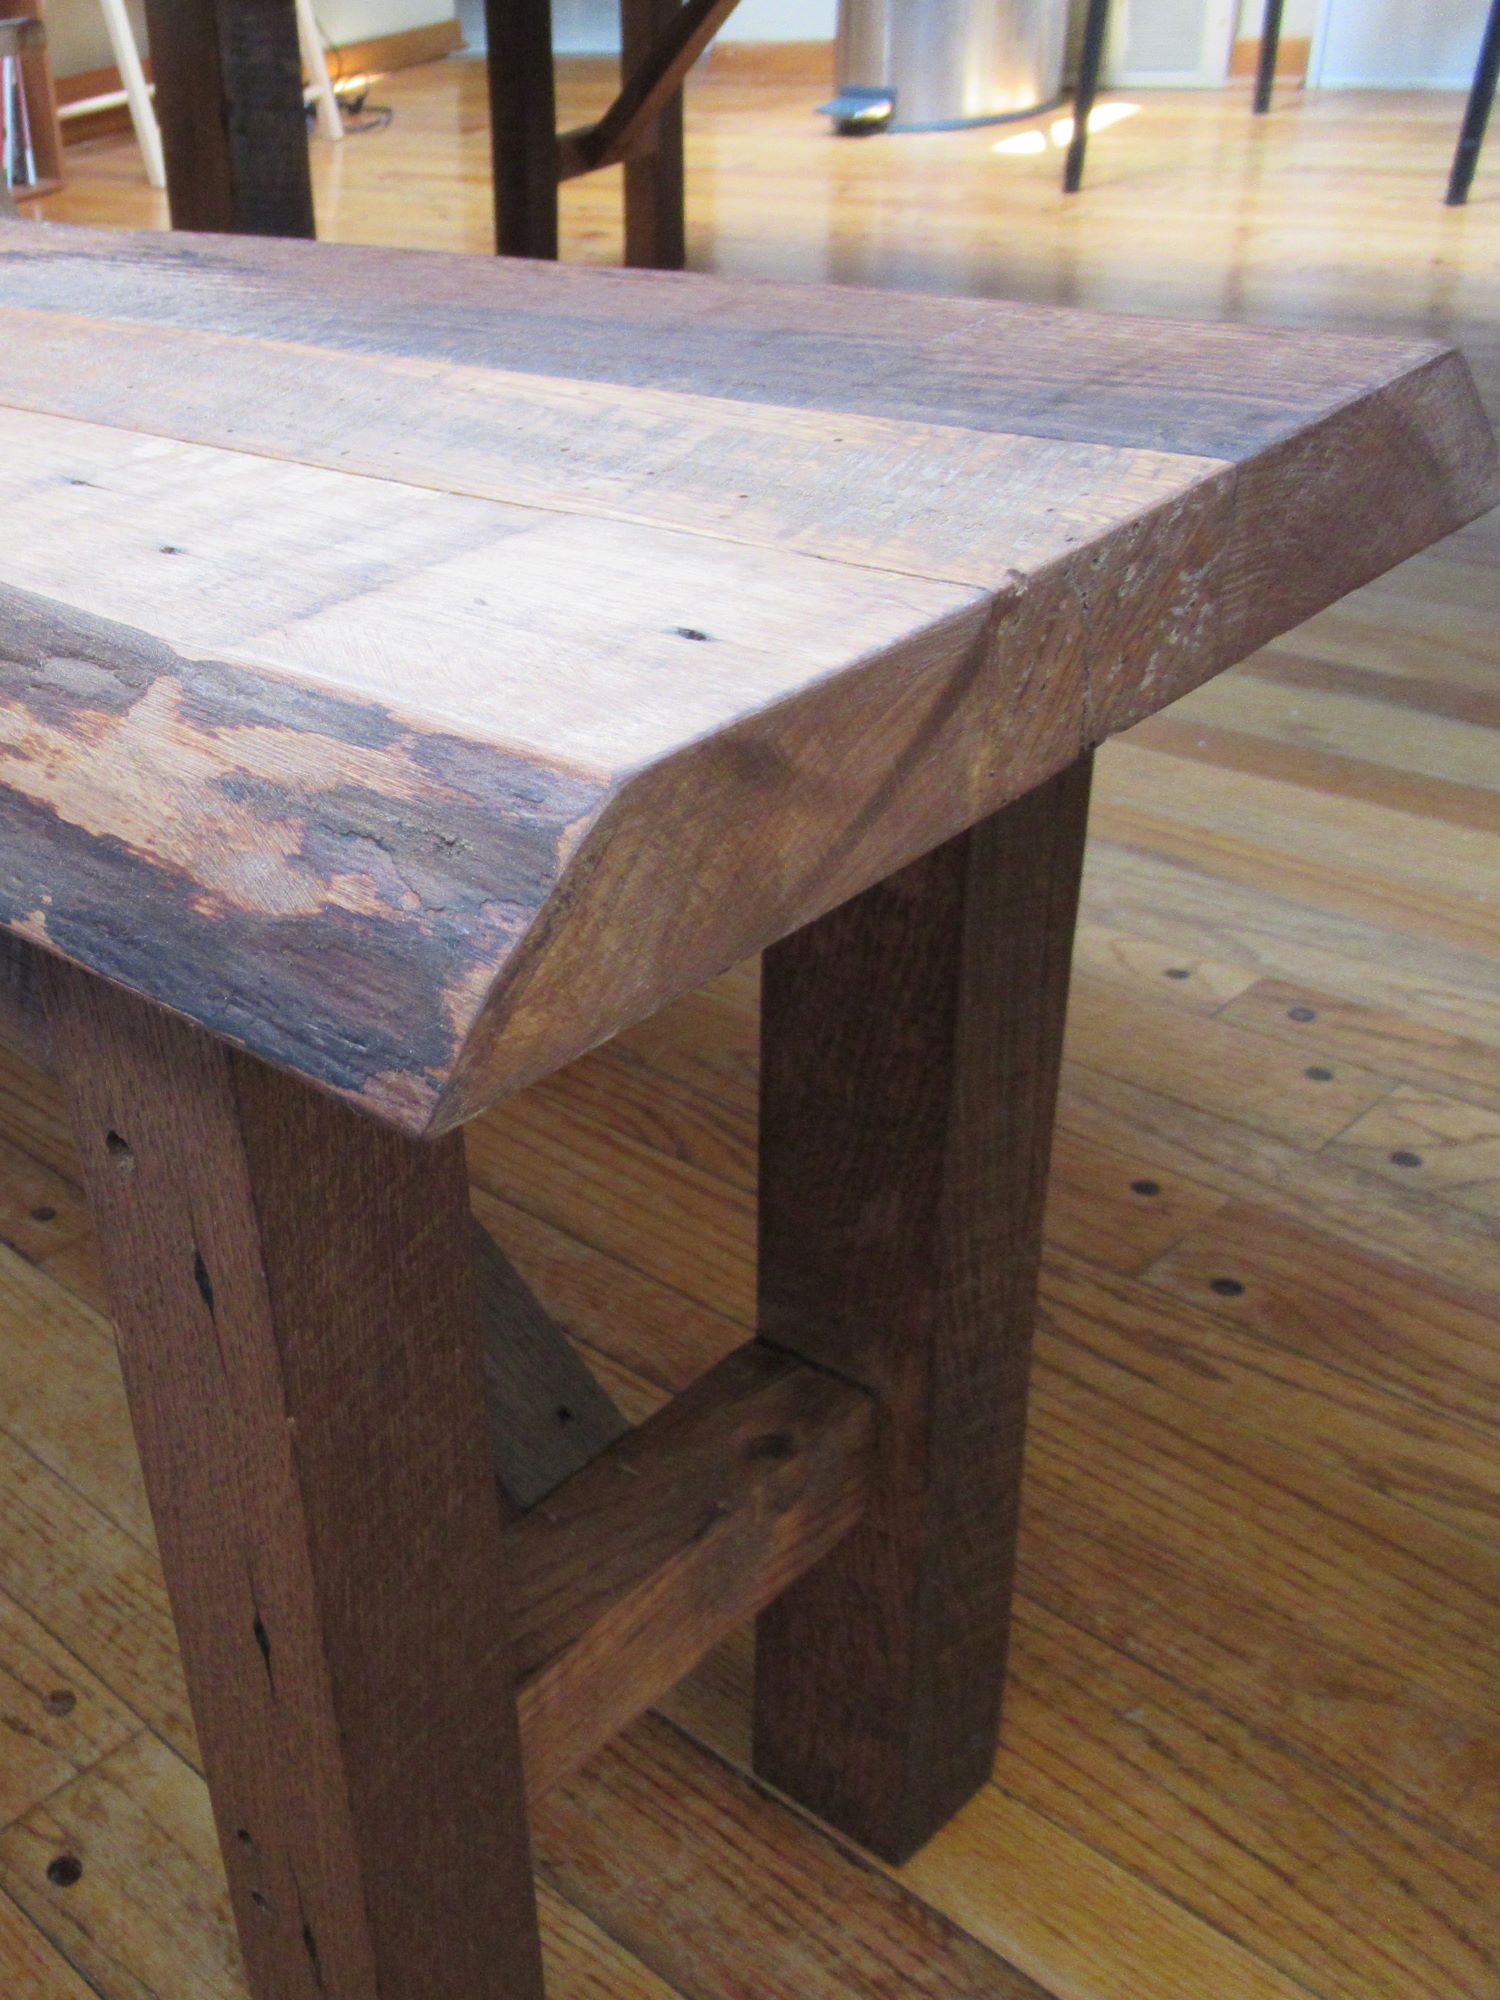 Handcrafted bench made with Michigan reclaimed wood